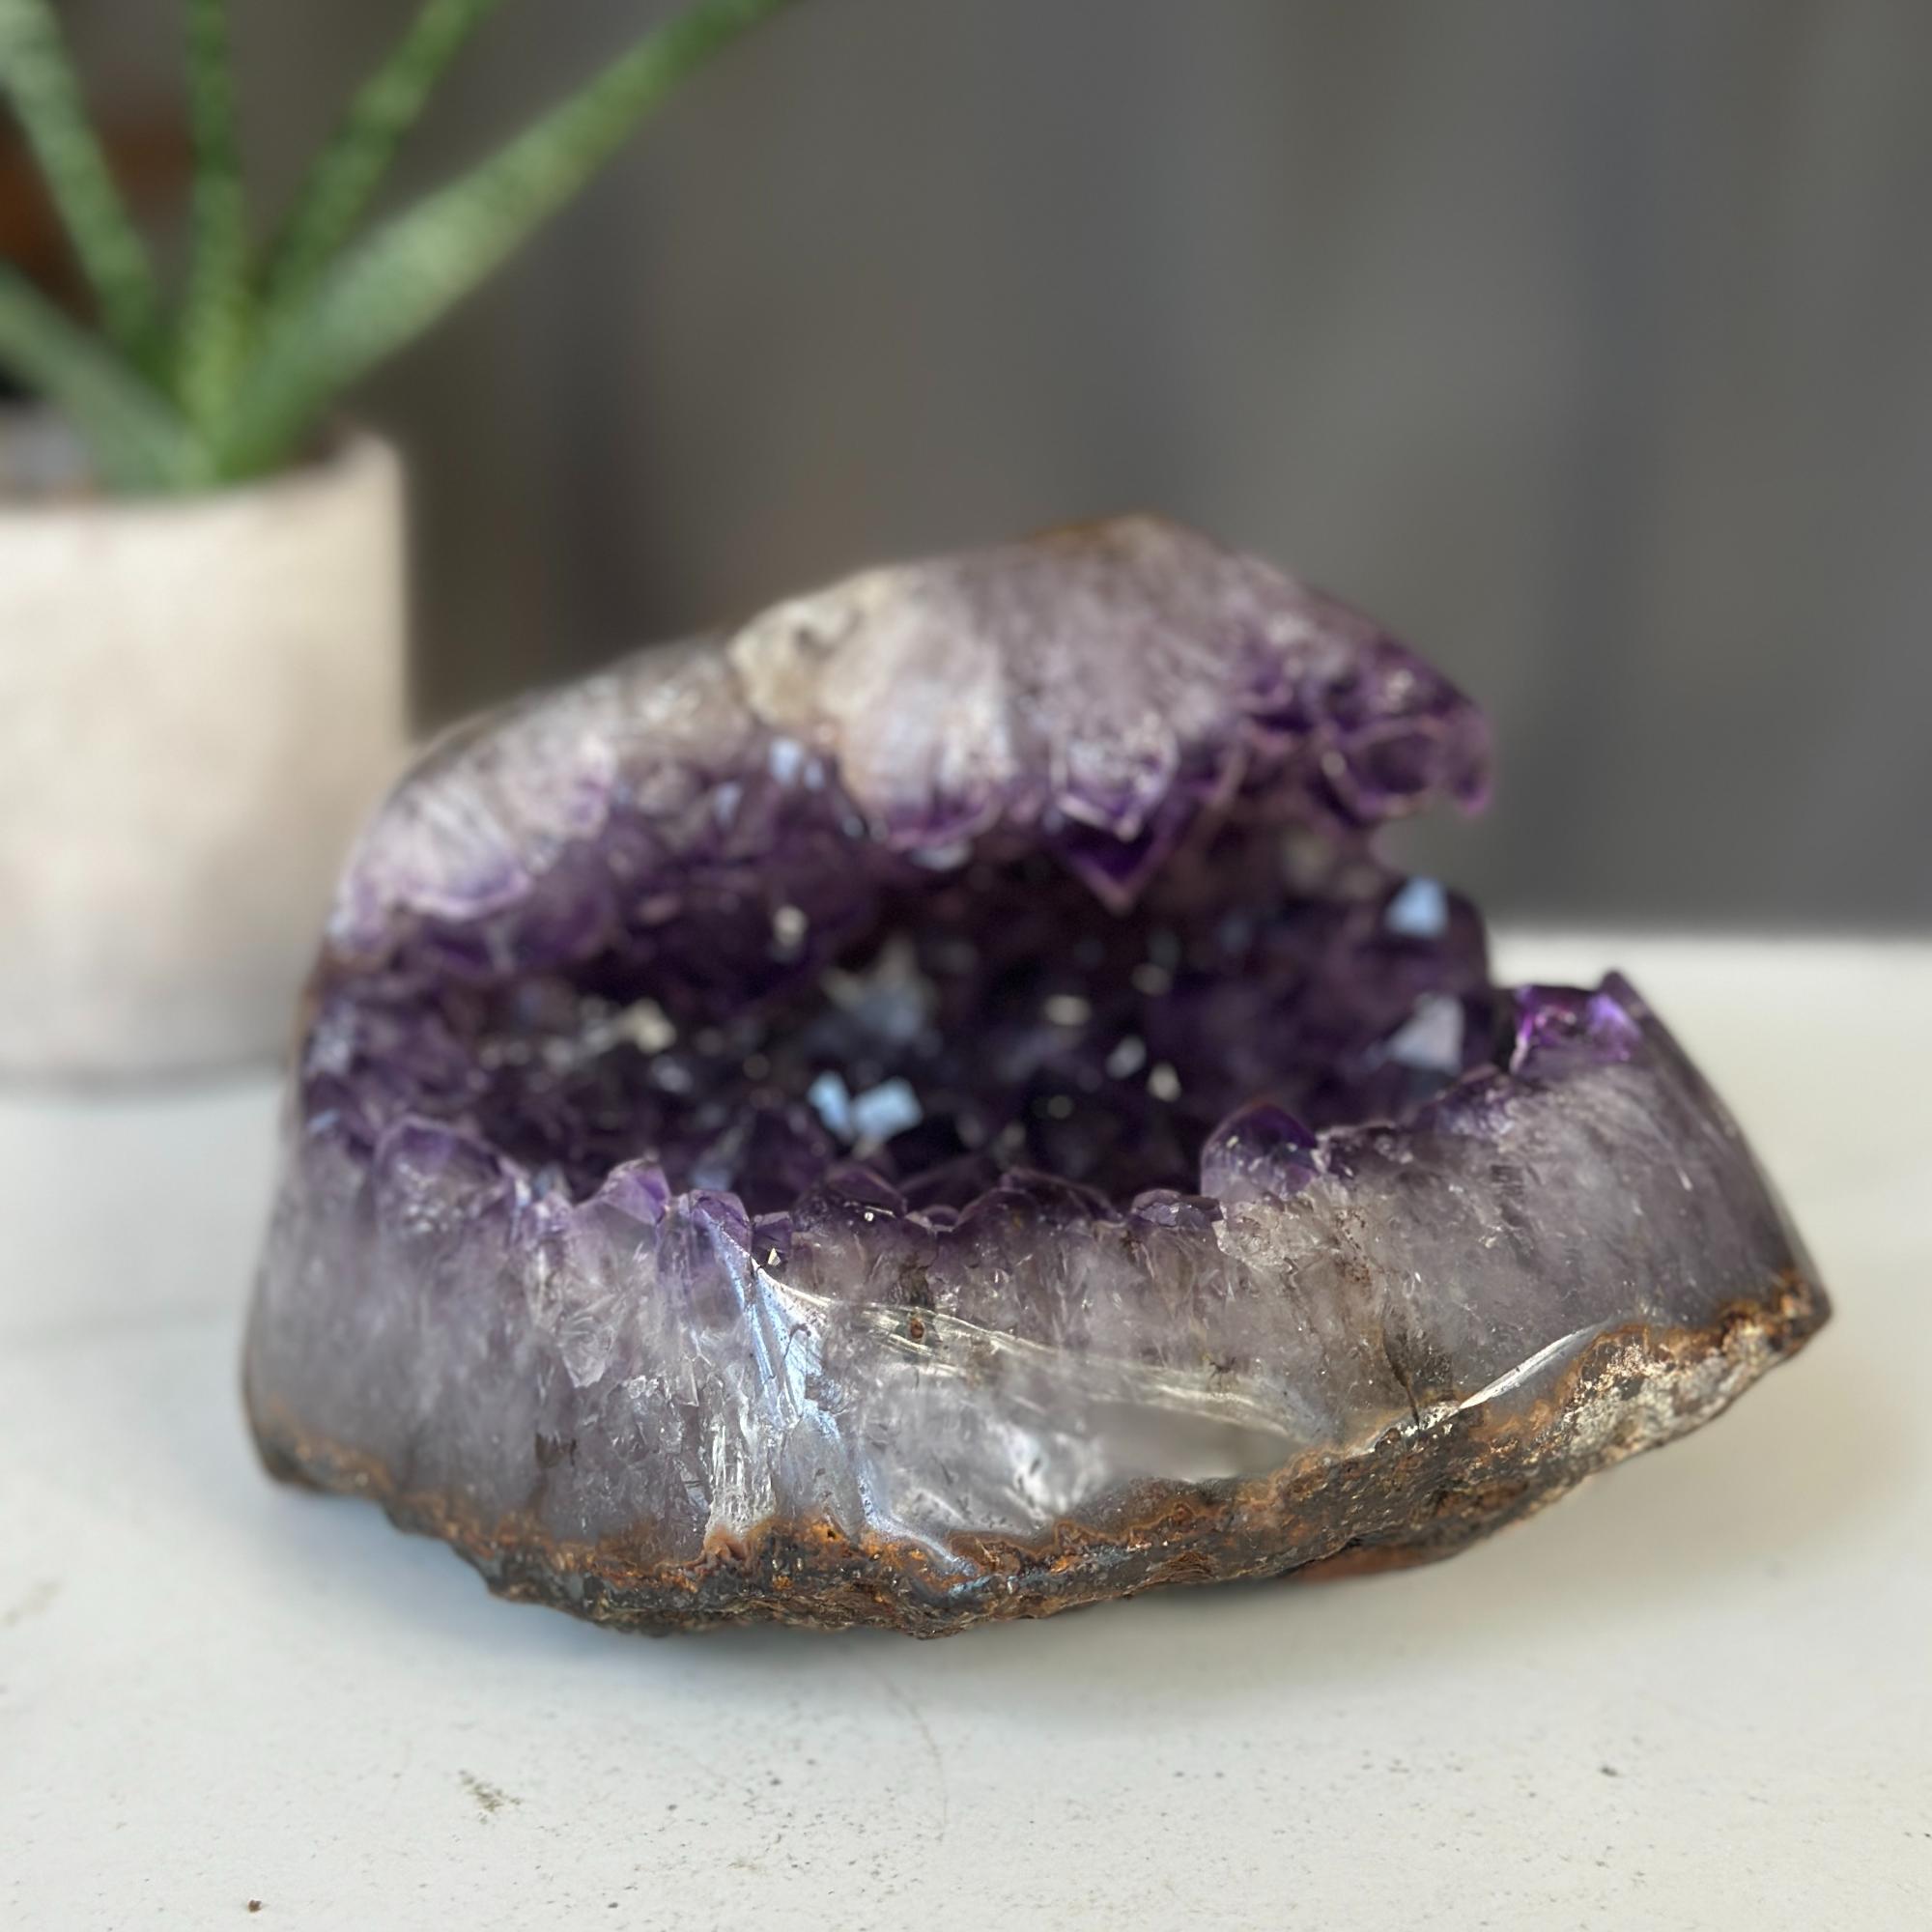 Amethyst Crystal Bowl with Agate formations, Natural Deep Purple Amethyst Flat Oval Shaped Cluster, Home Decor Crystal